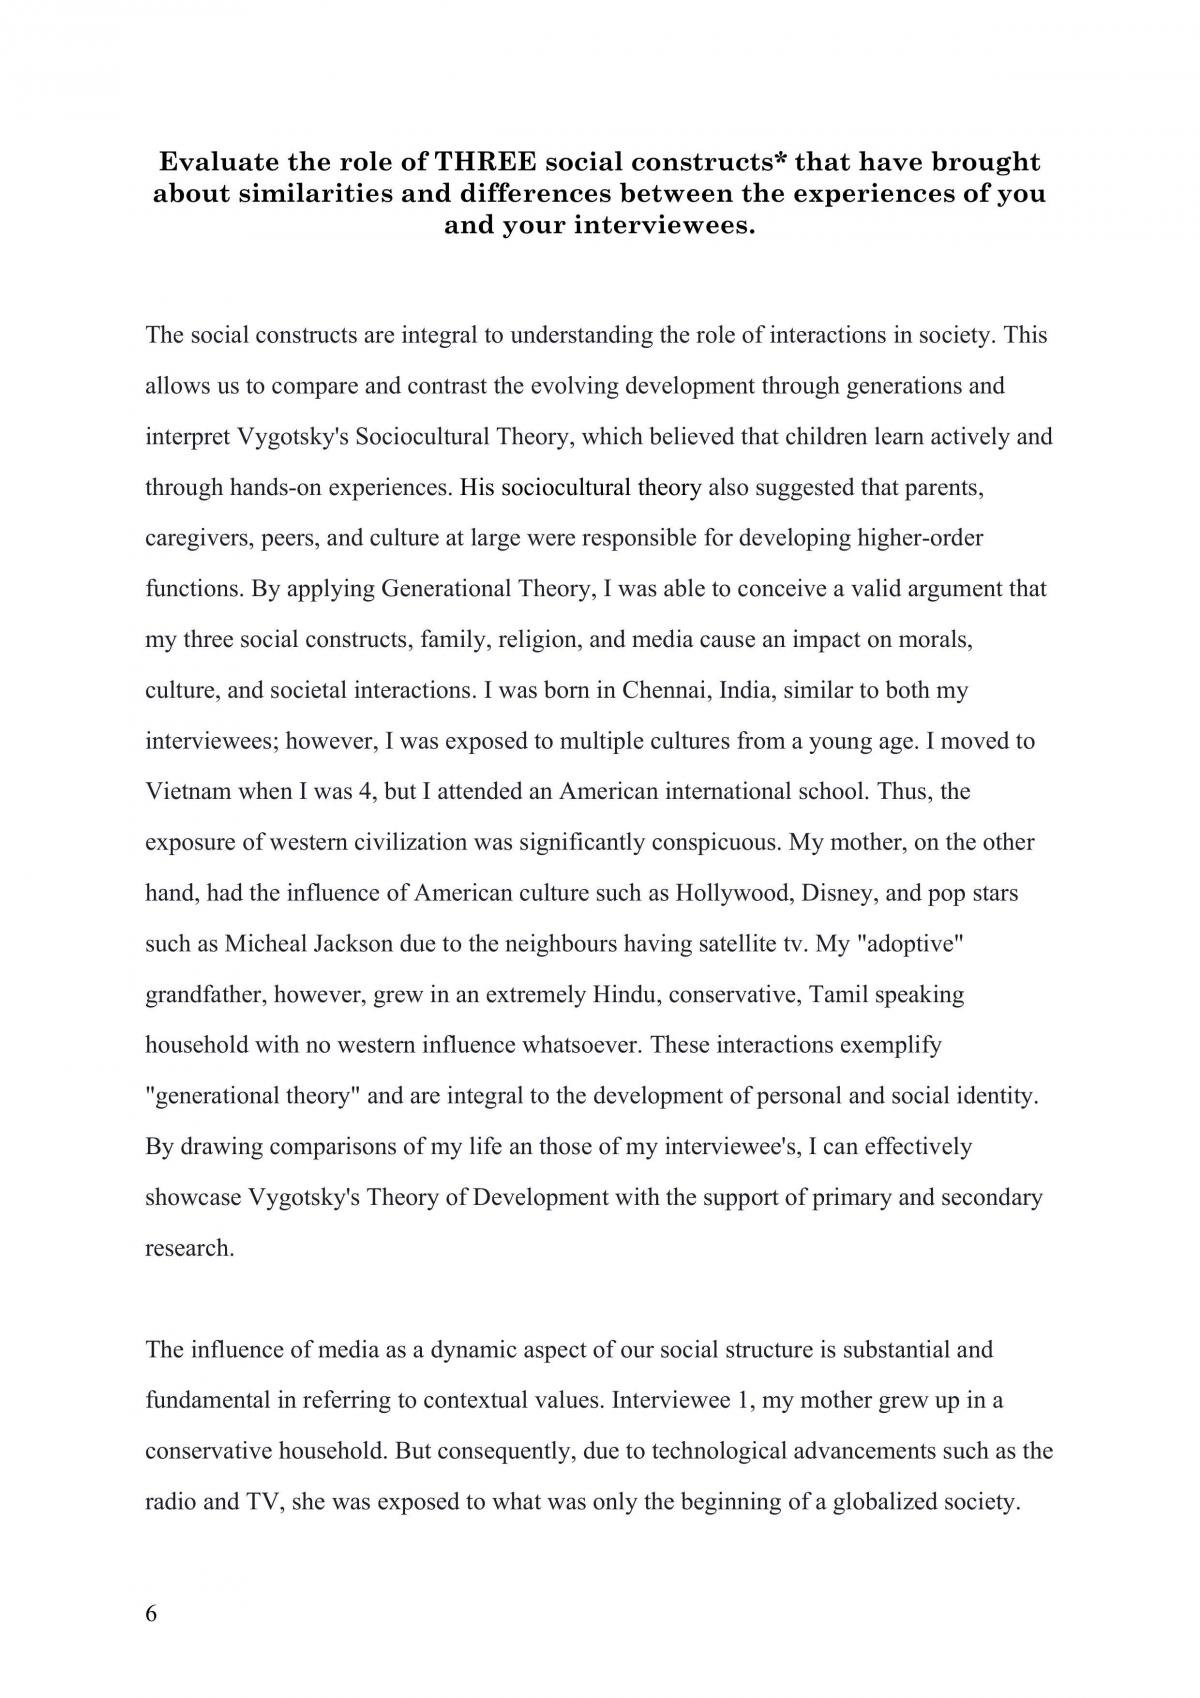 The role of THREE social constructs - Page 1